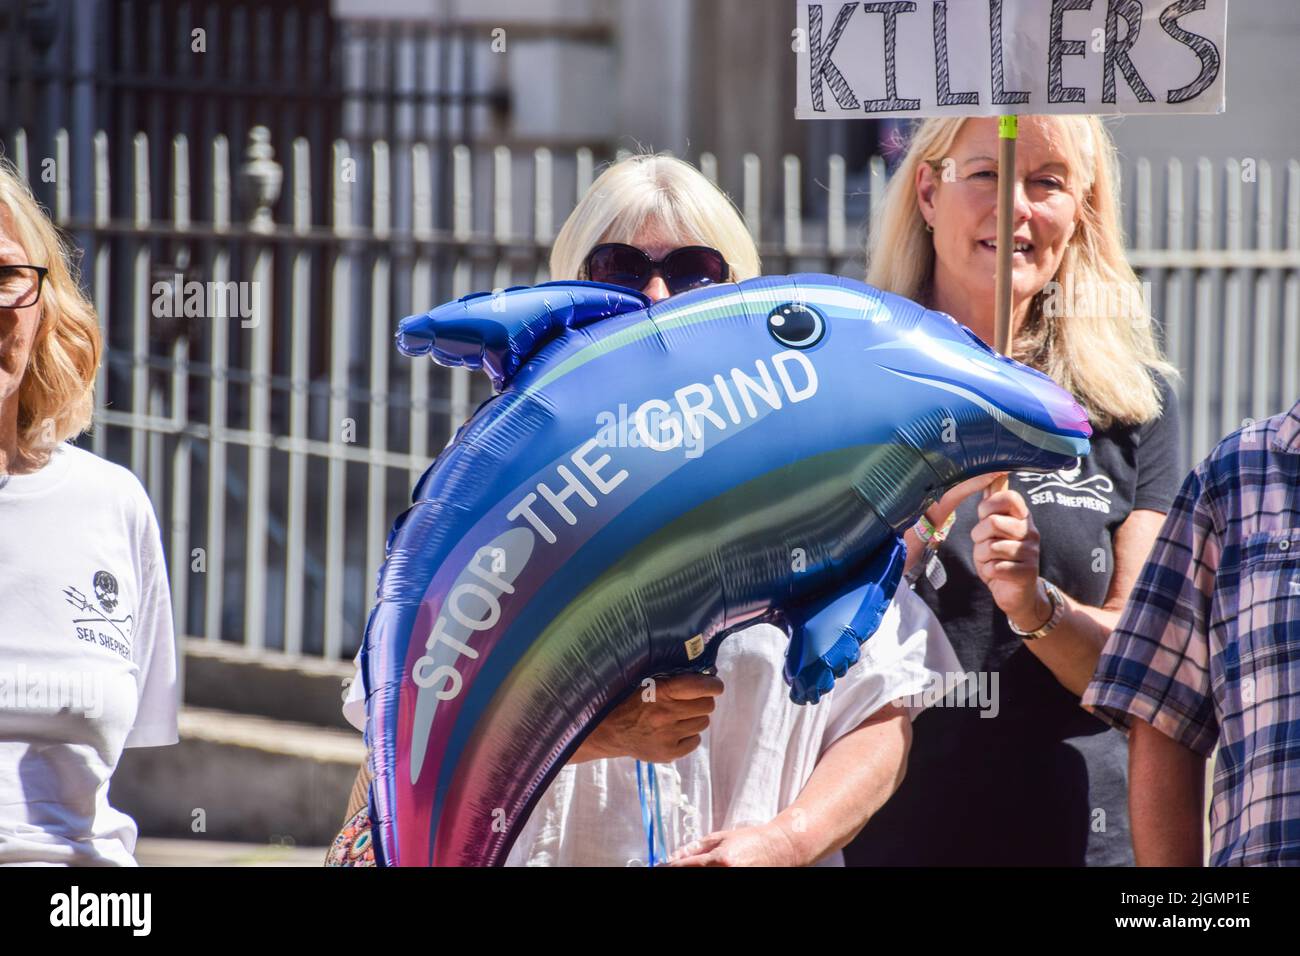 London, UK. 11th July, 2022. A protester holds a dolphin-shaped balloon with the message 'Stop the Grind' during the demonstration. Ocean and marine wildlife conservation organization Sea Shepherd staged a rally outside the Parliament as MPs debated a petition to suspend trade with the Faroe Islands until they end brutal whale and dolphin hunts, known as the 'Grind'. (Photo by Vuk Valcic/SOPA Images/Sipa USA) Credit: Sipa USA/Alamy Live News Stock Photo